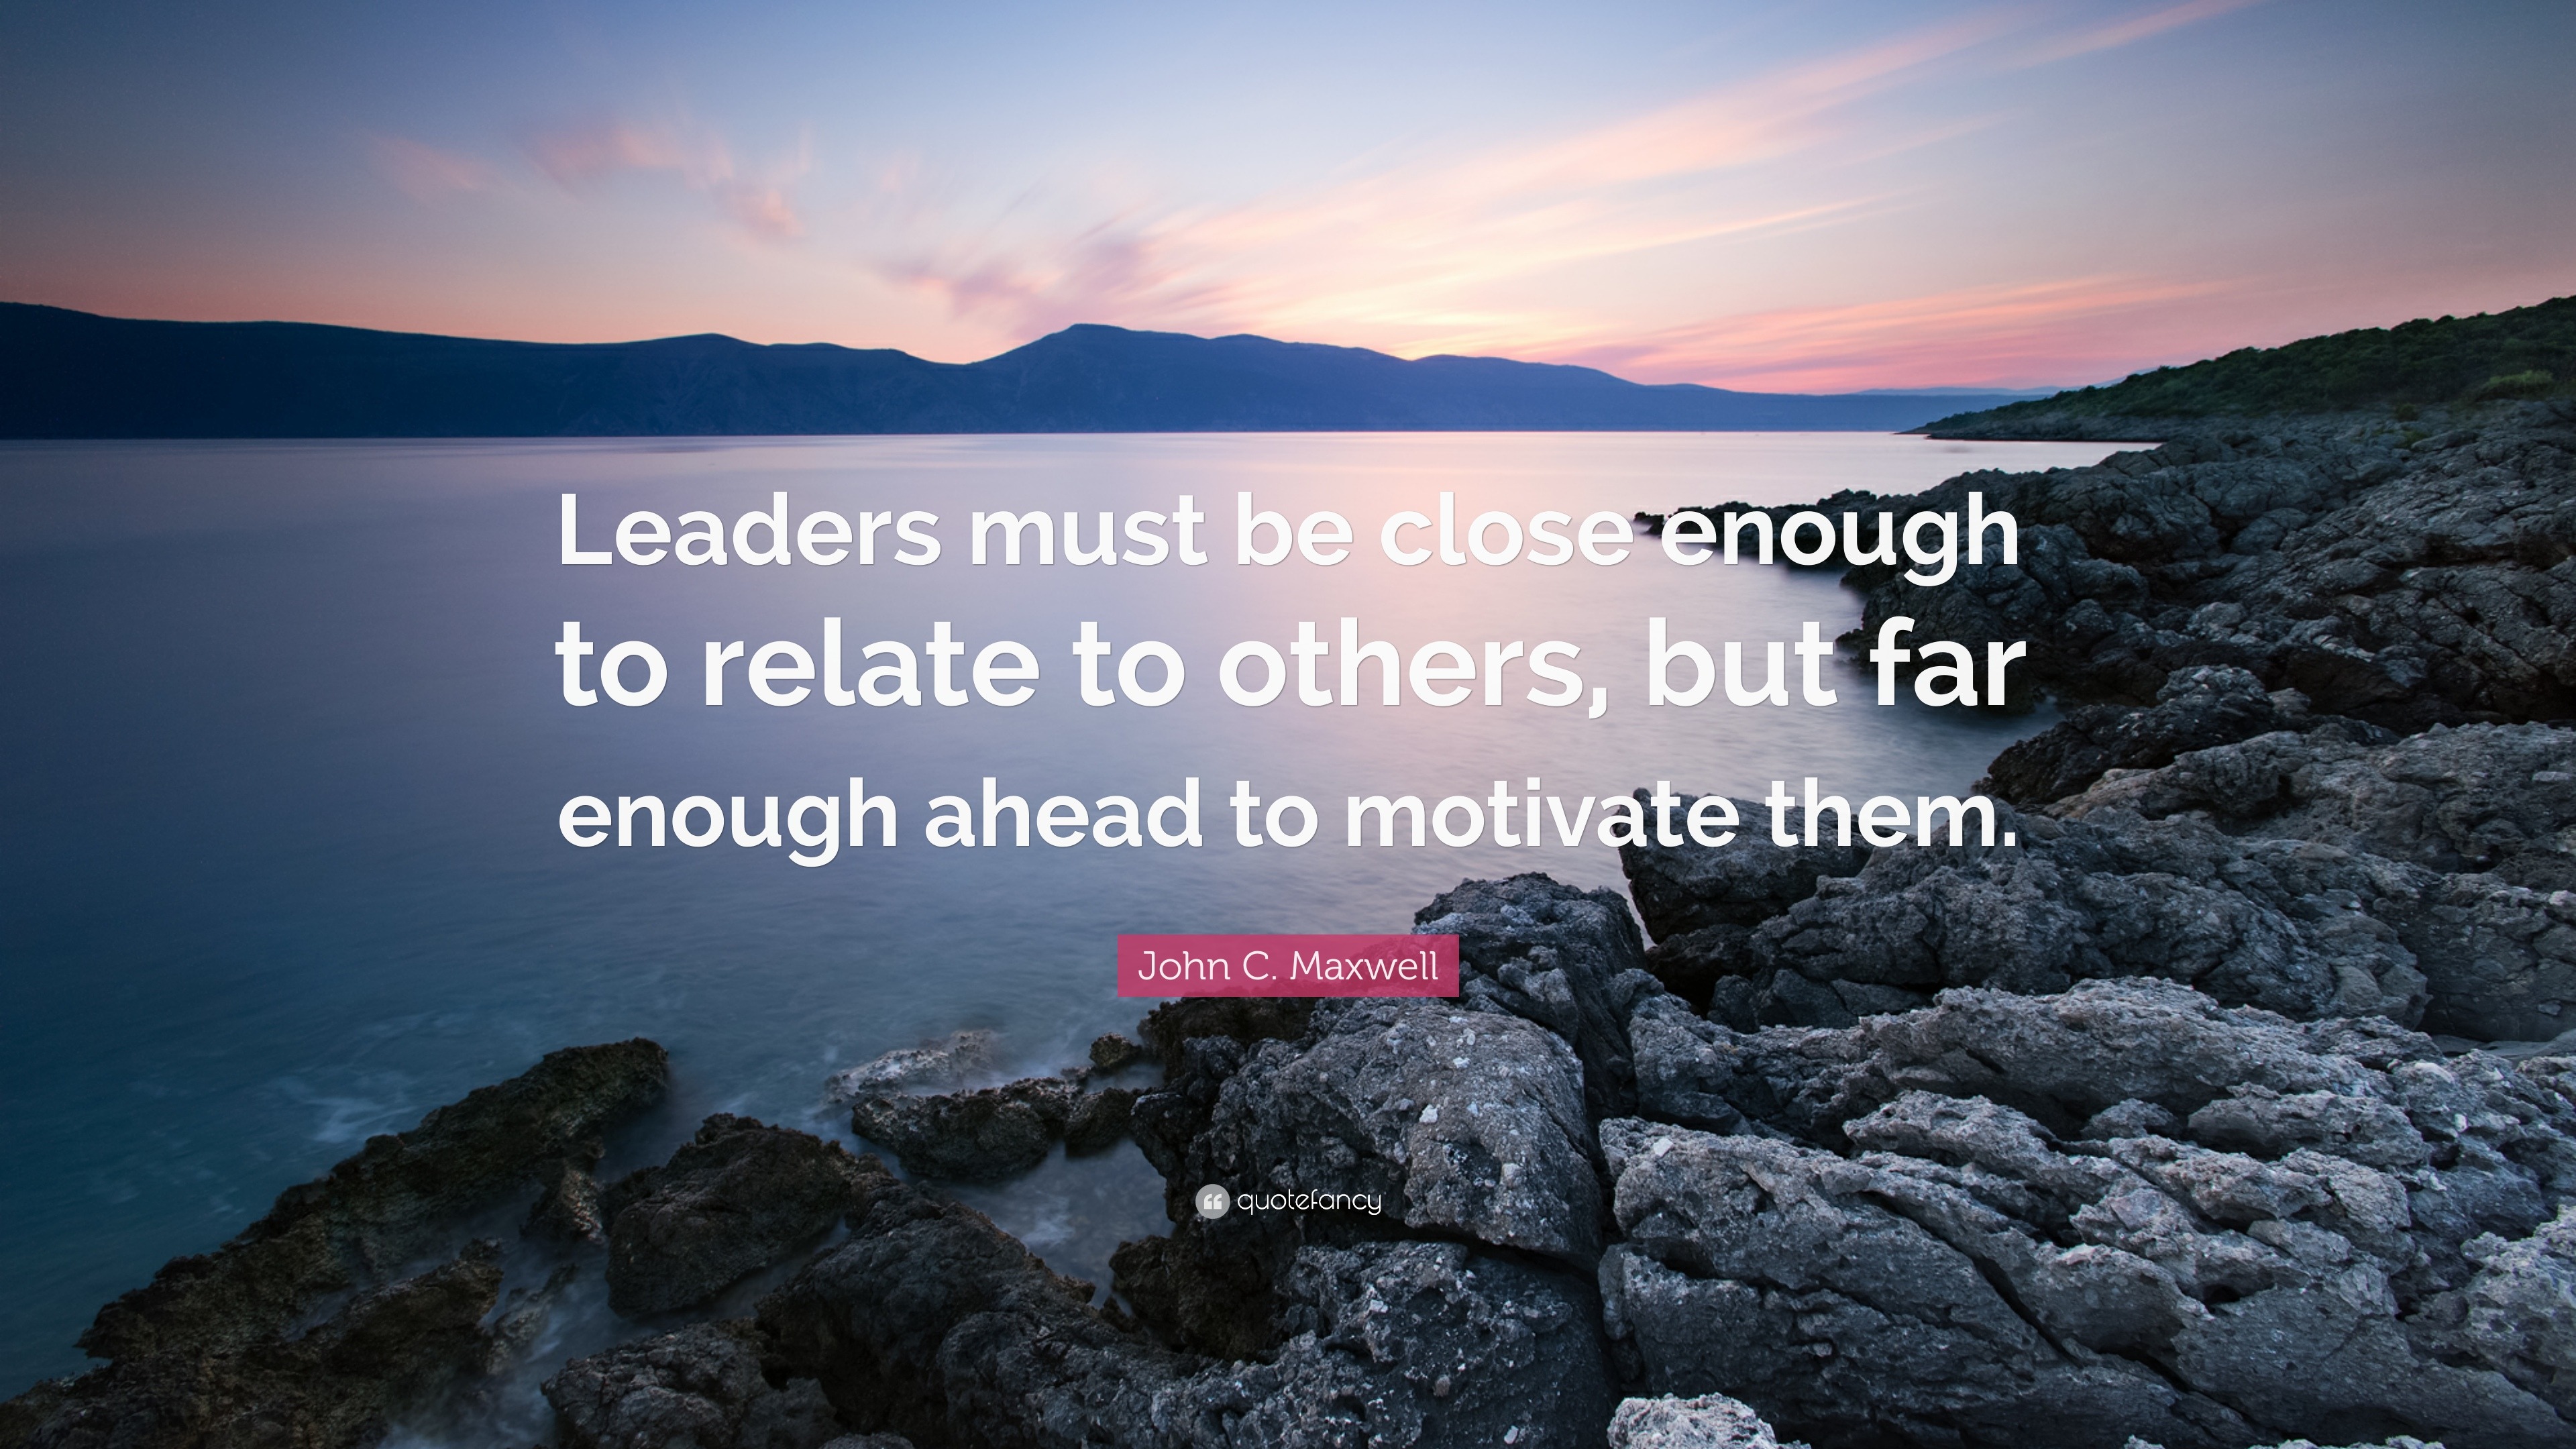 John C. Maxwell Quote: “Leaders must be close enough to relate to